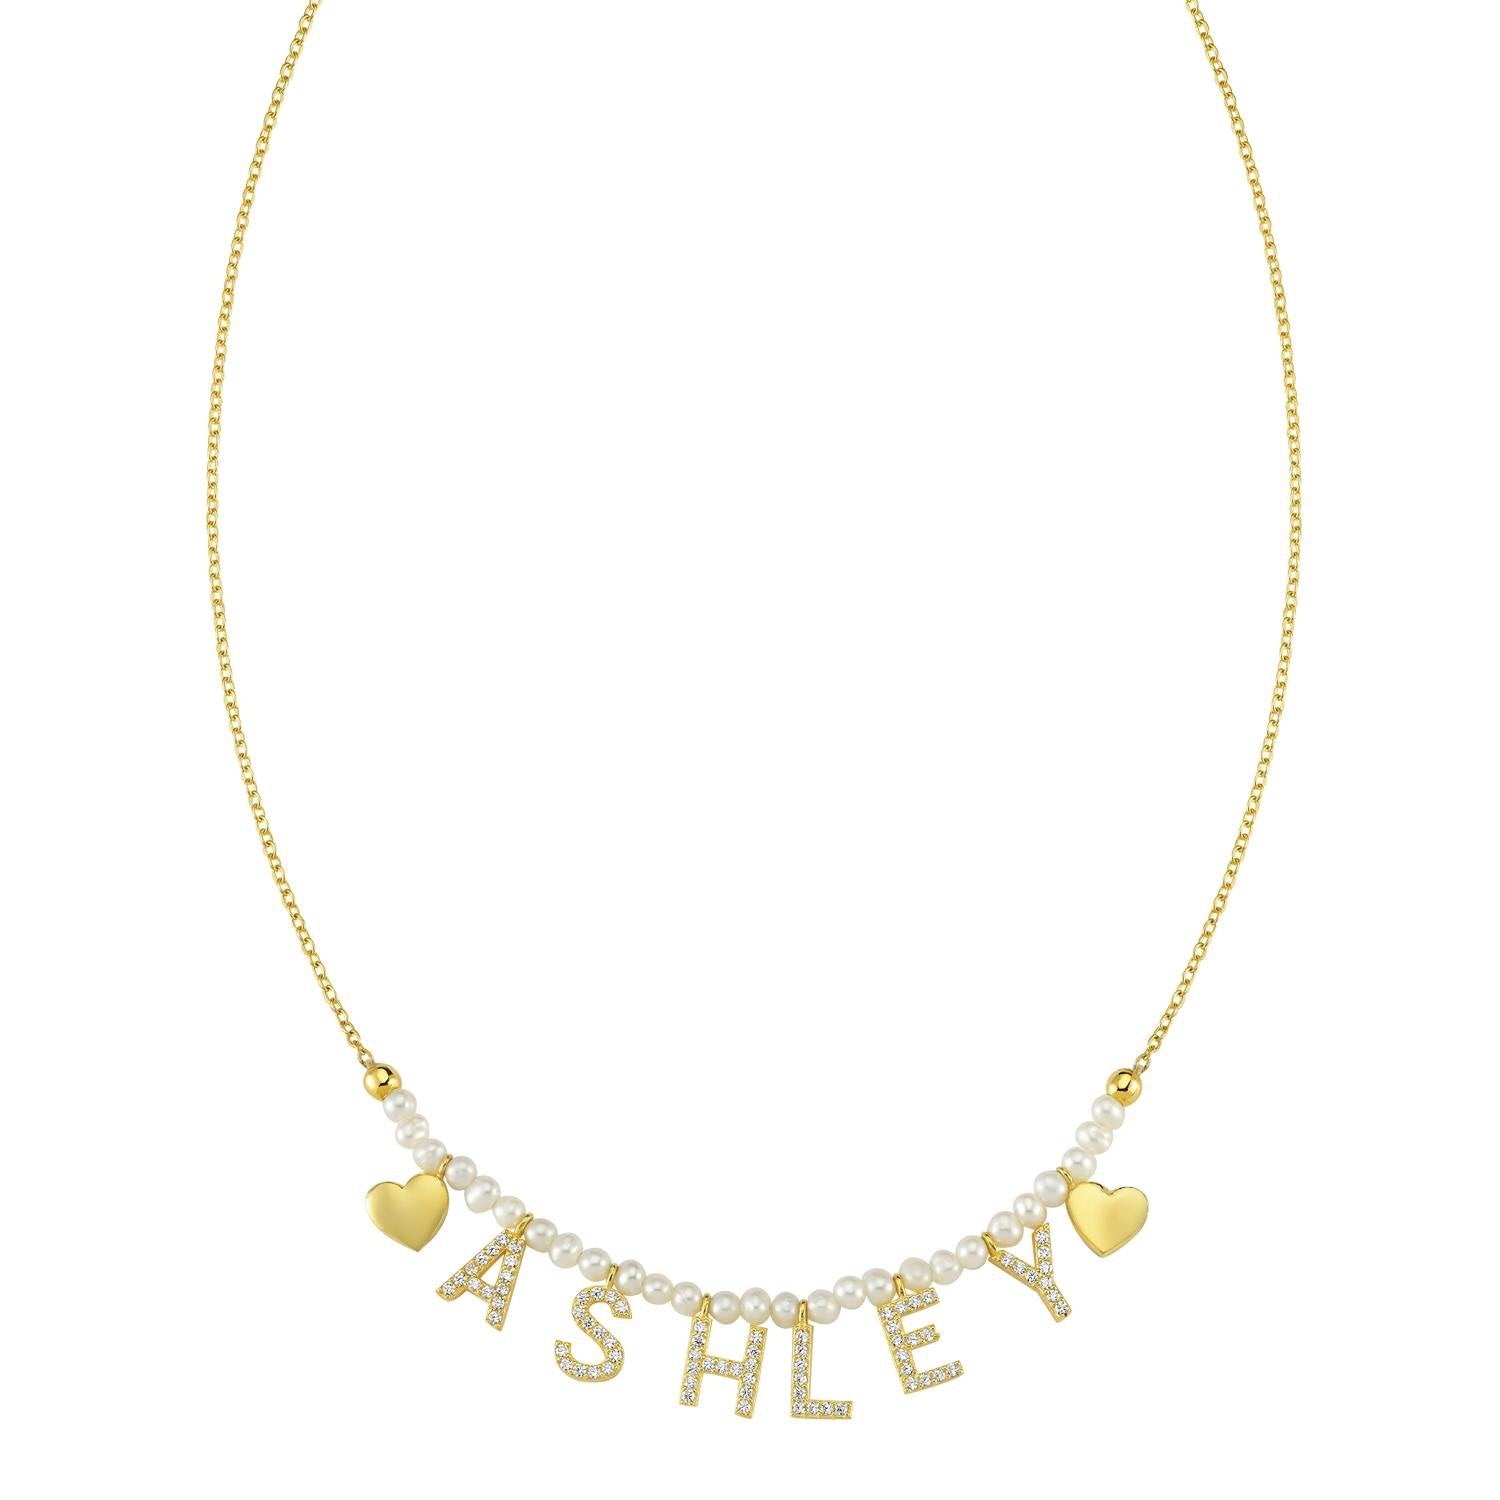 Pearl It’s All in a Name™ Necklace JEWELRY The Sis Kiss Yellow Gold 